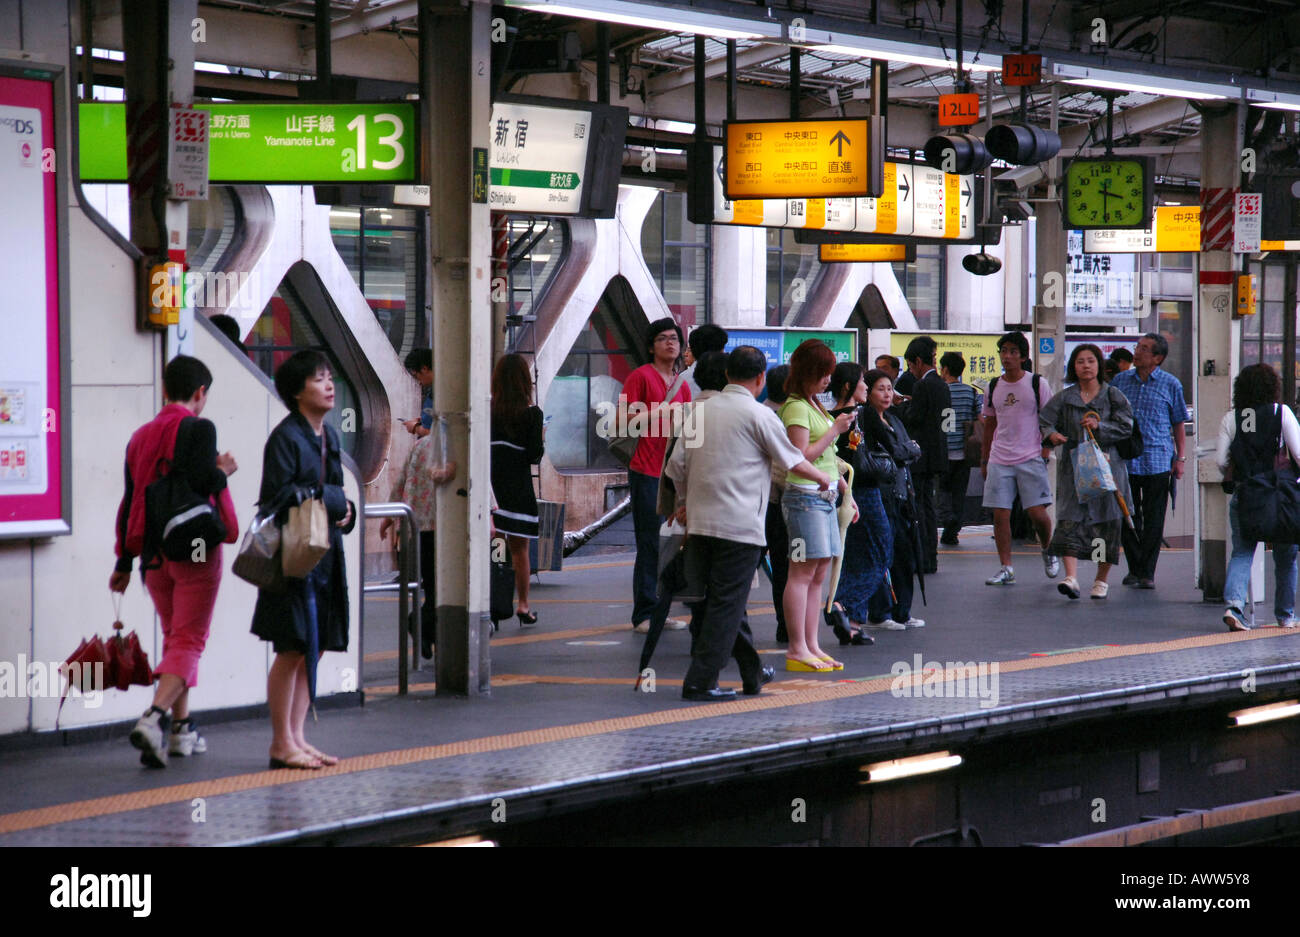 People waiting for trains, JR Yamanote Line subway system, Tokyo Japan Stock Photo